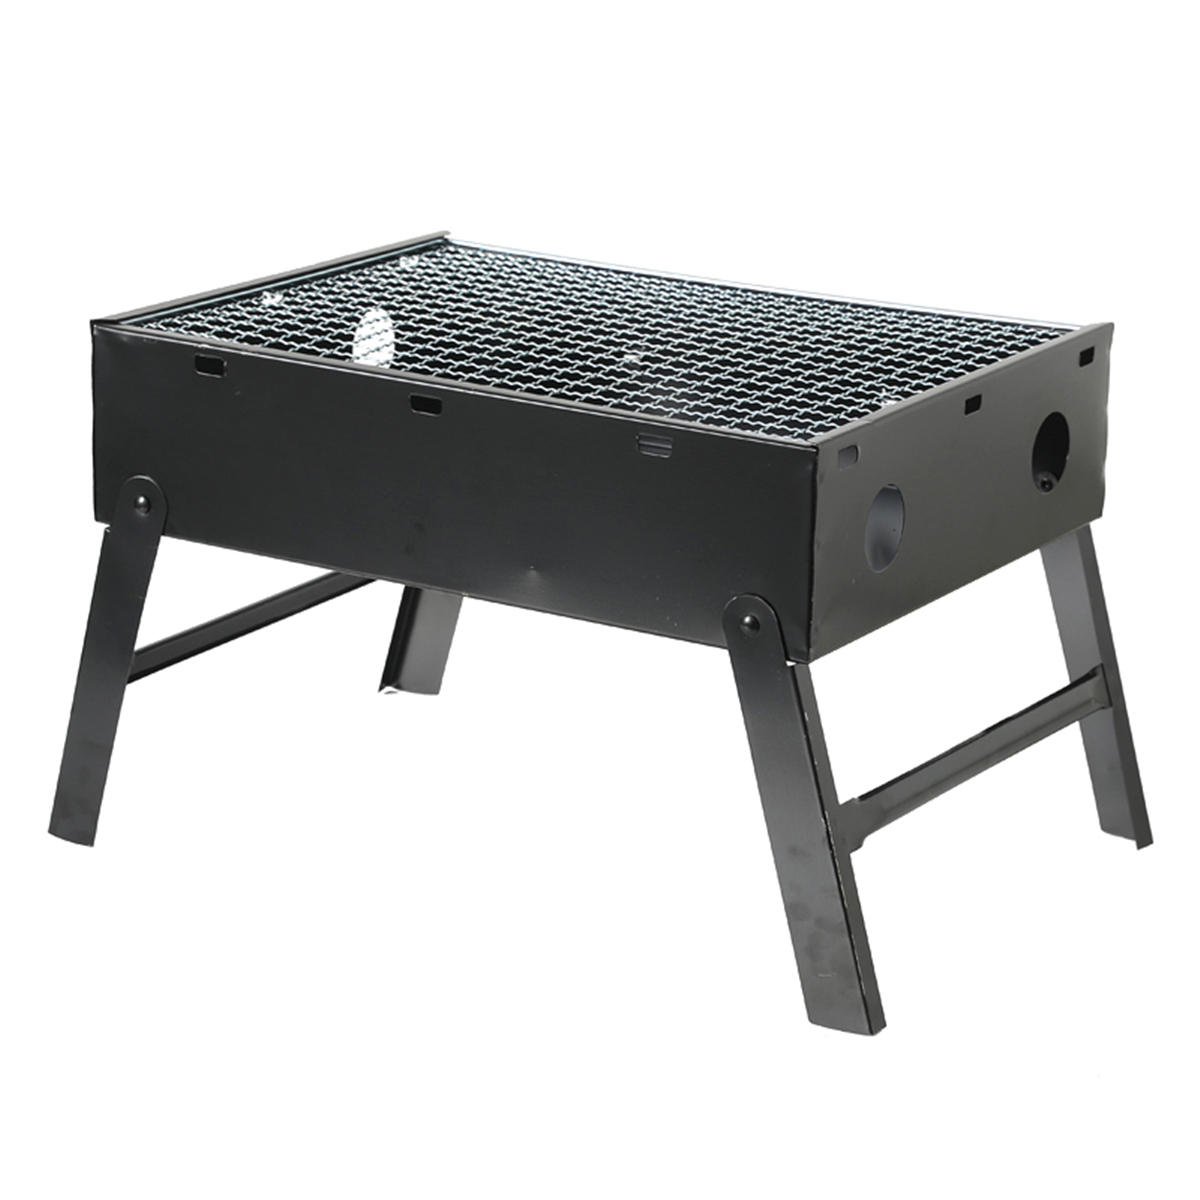 3-4 People Outdoor Portable Foldable Charcoal BBQ Grill Hibachi Barbecue Folding Cooking Stove Camping Picnic